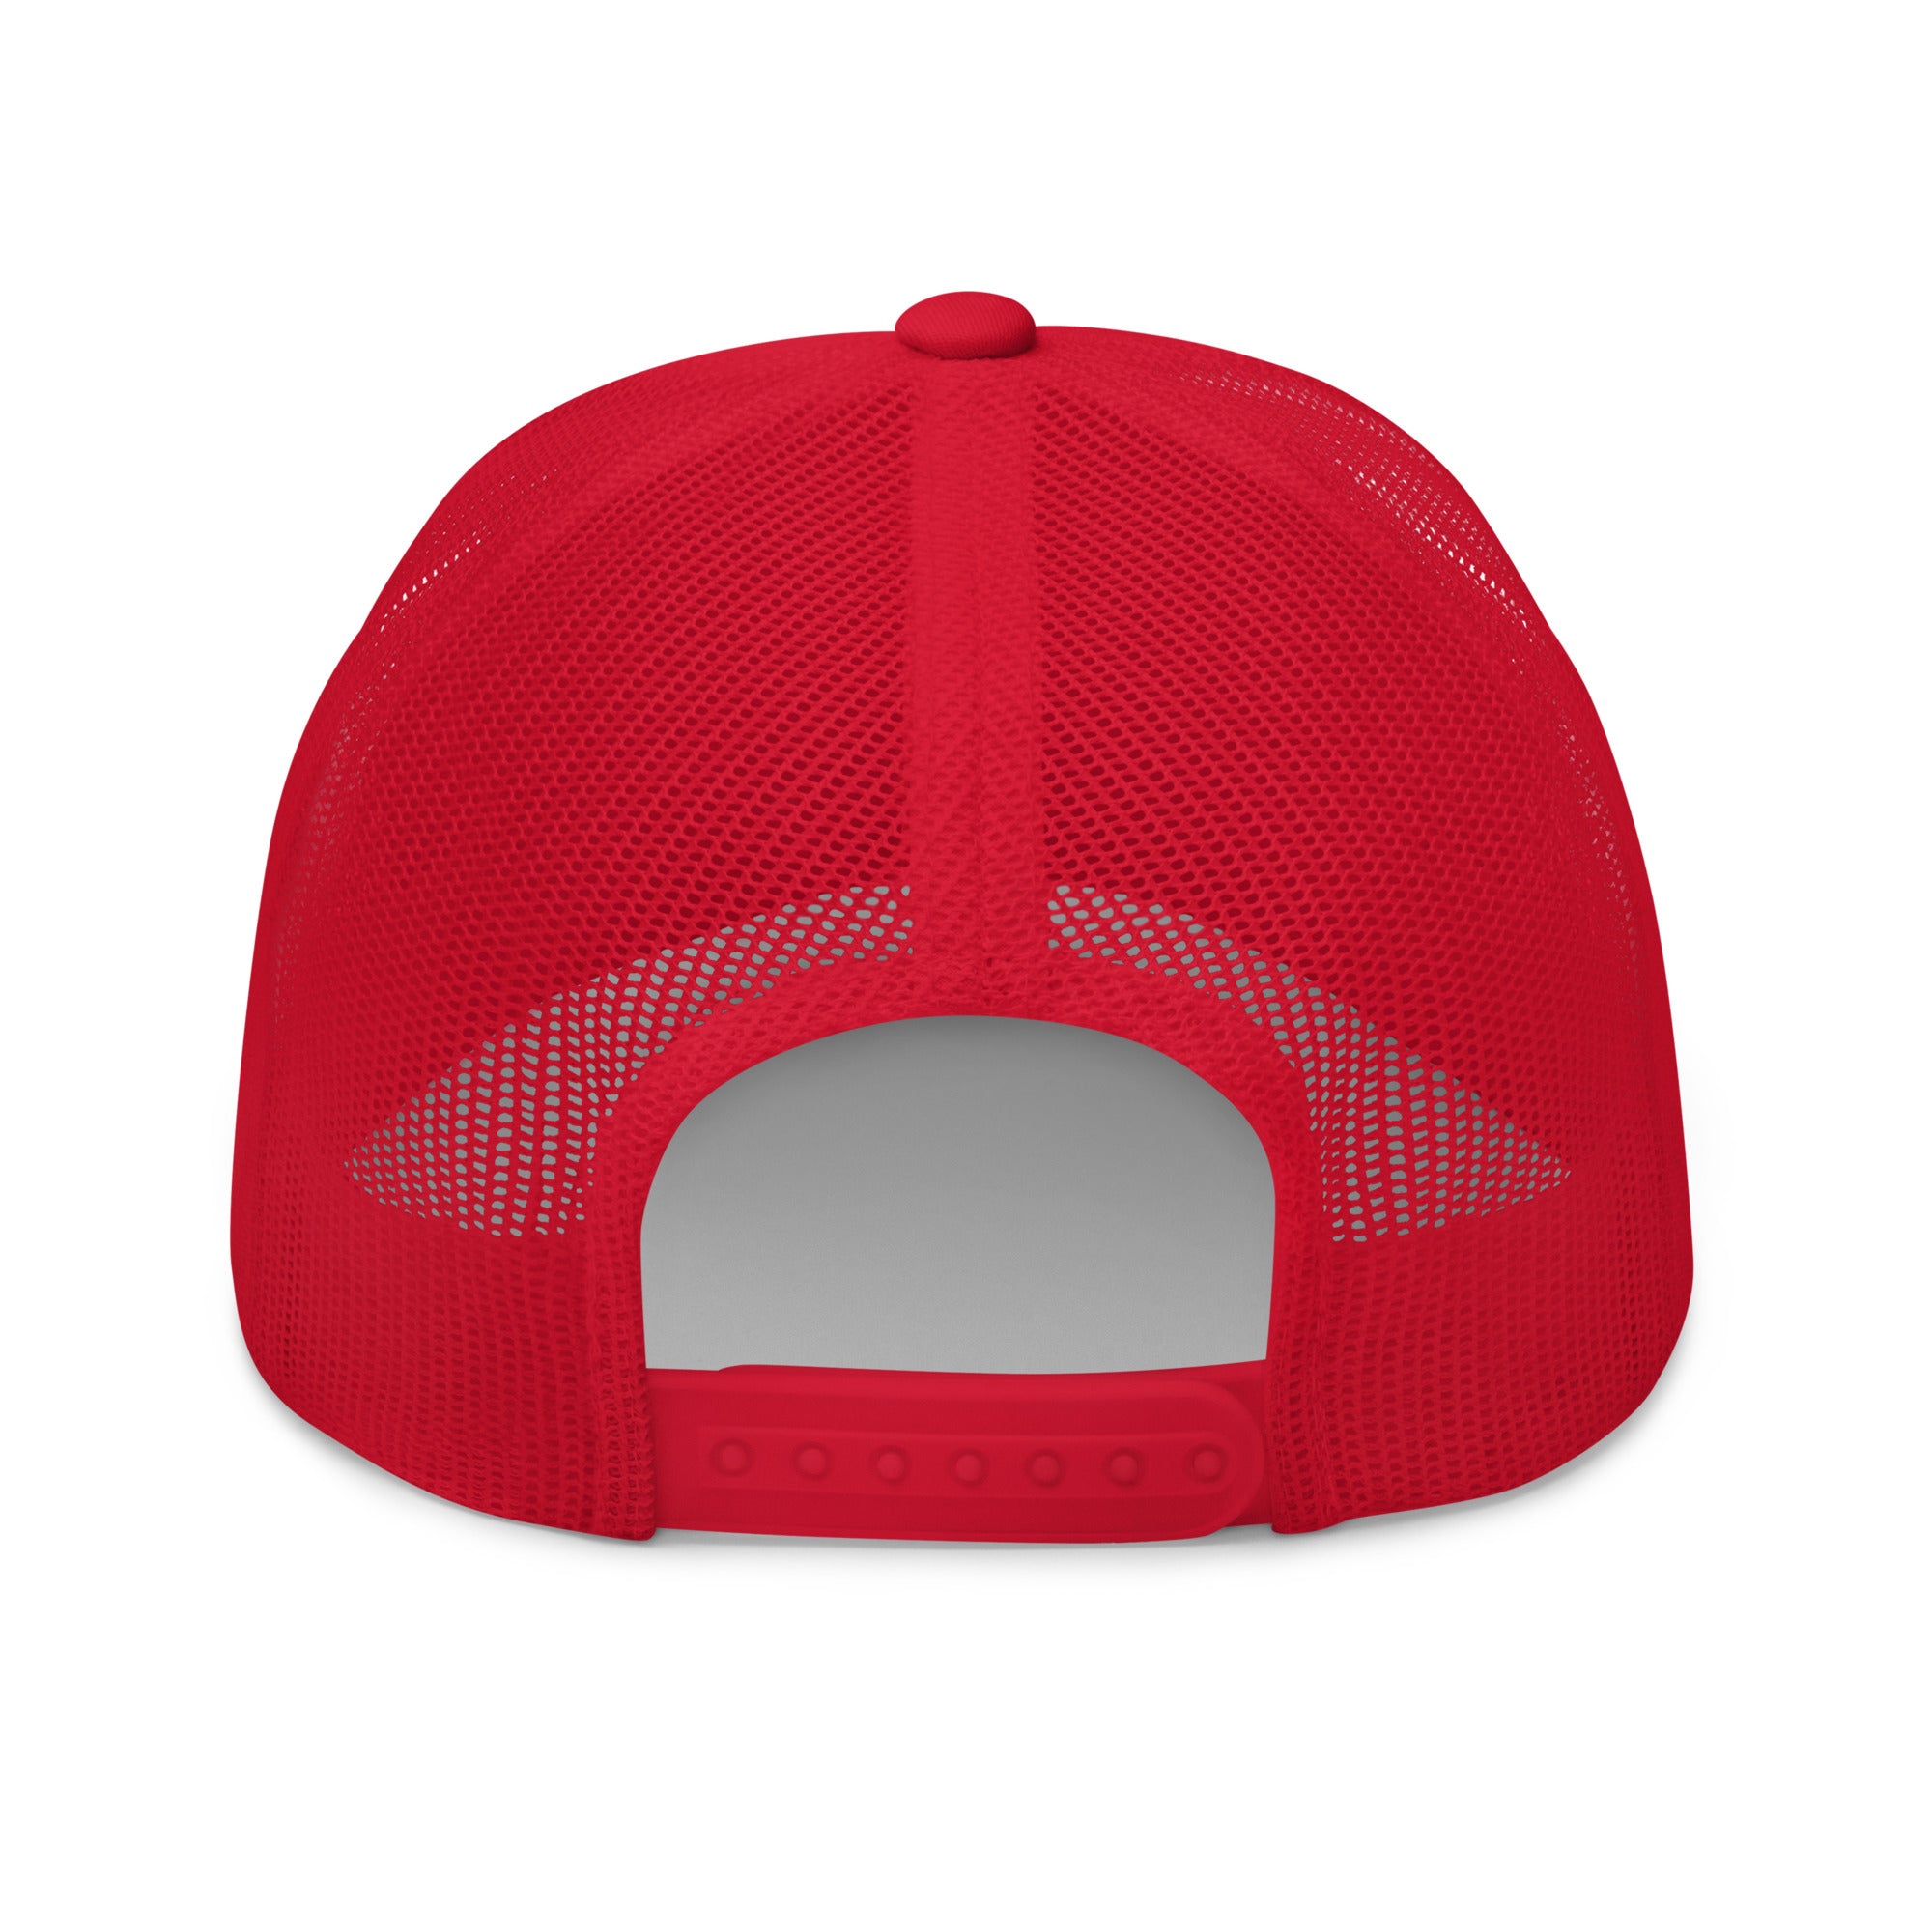 Bitcoin Merch - The Satoshi Trucker Hat has mesh back panels and a snapback closure. Color: Red. Back view.